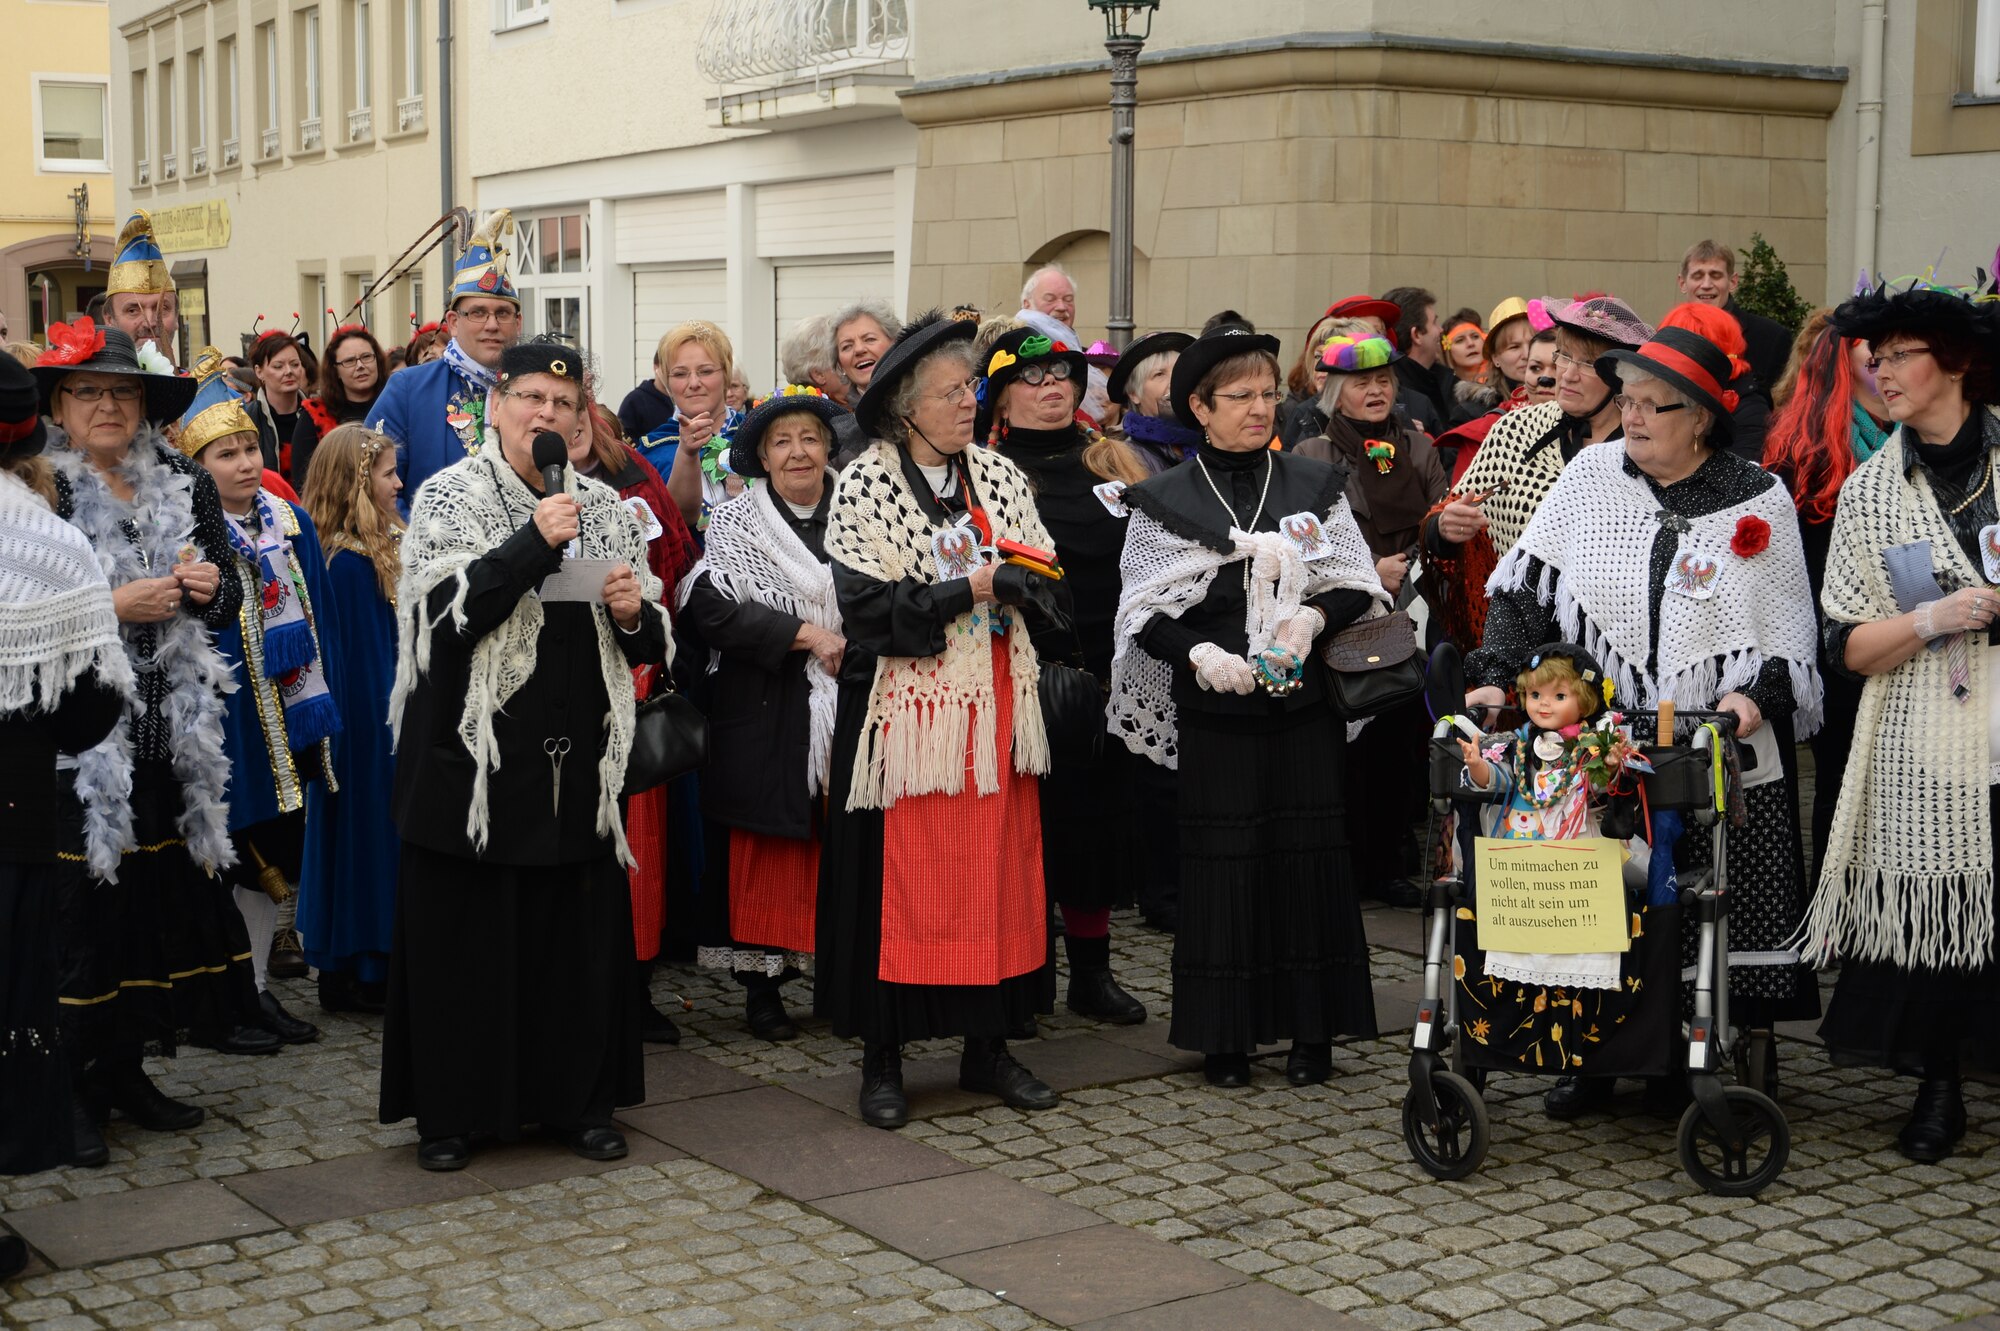 Female citizens of Bitburg, dressed in Fasching attire, present  their petition before city hall during a Fasching celebration in Bitburg, Germany, Feb. 27, 2014. As part of Fasching tradition, female citizens may cut off the tie of any male within reach. (U.S. Air Force photo by Staff Sgt. Joe W. McFadden/Released)